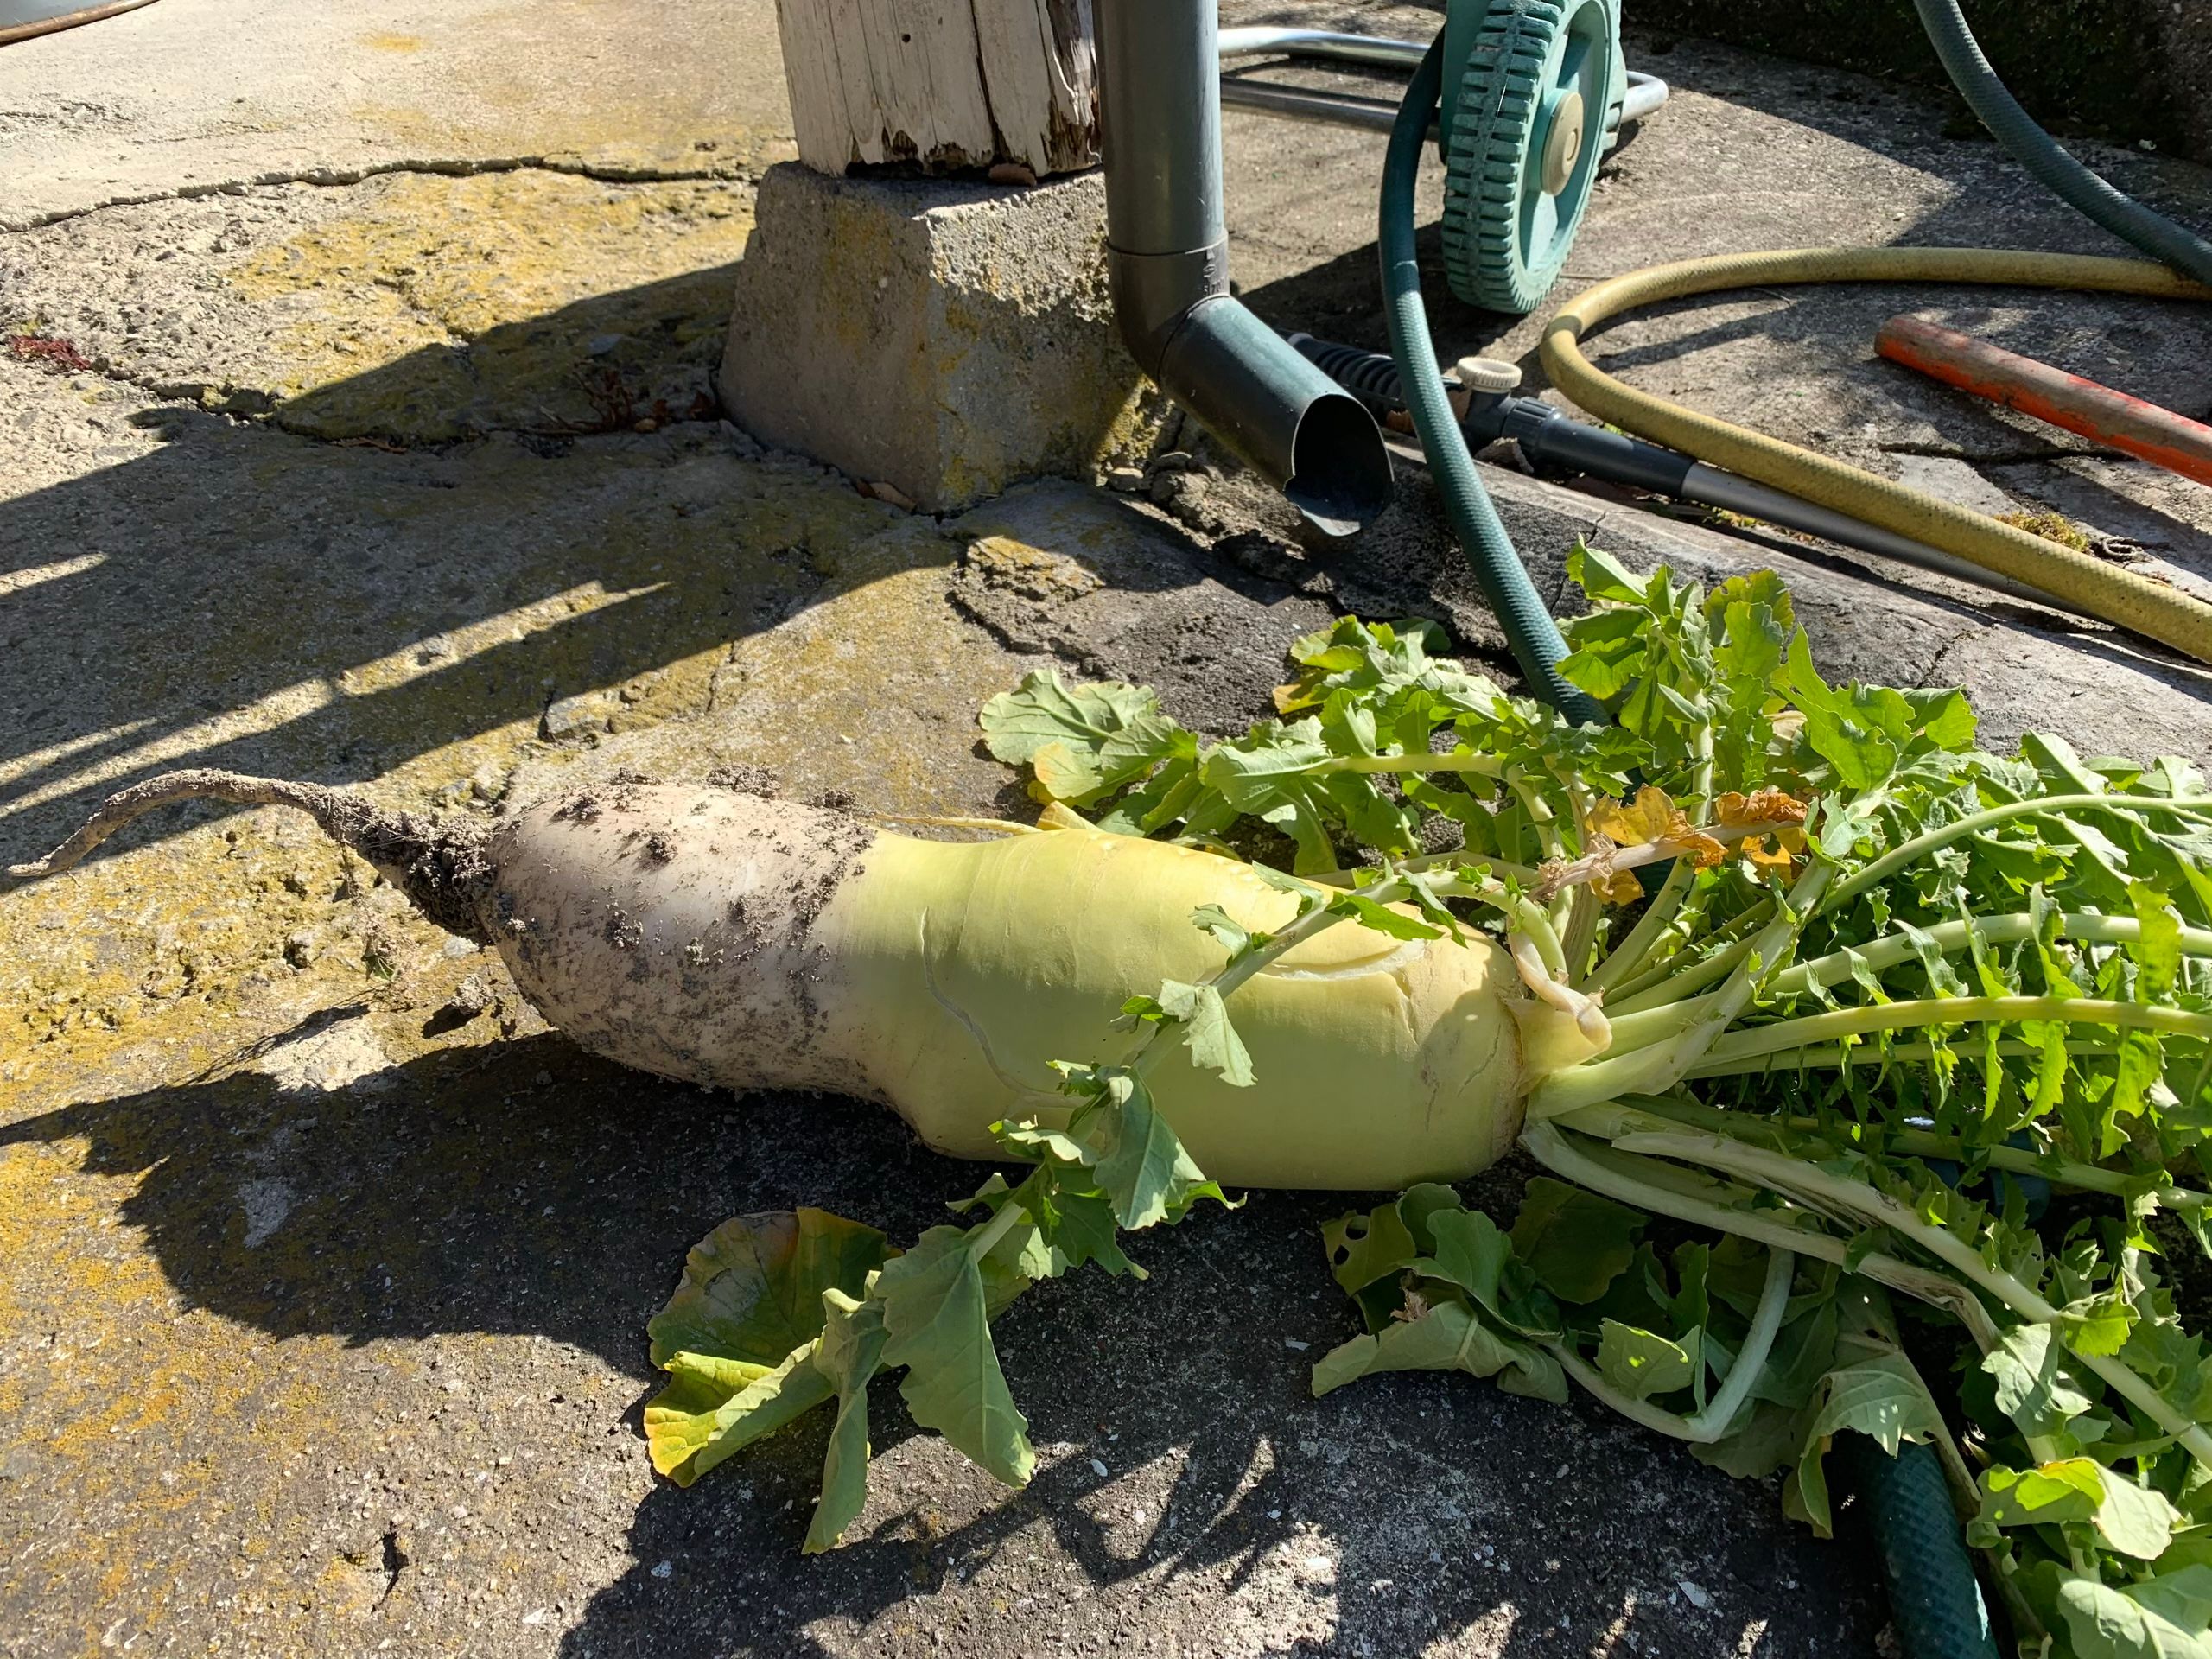 A daikon, a large Japanese radish, freshly pulled from the ground.